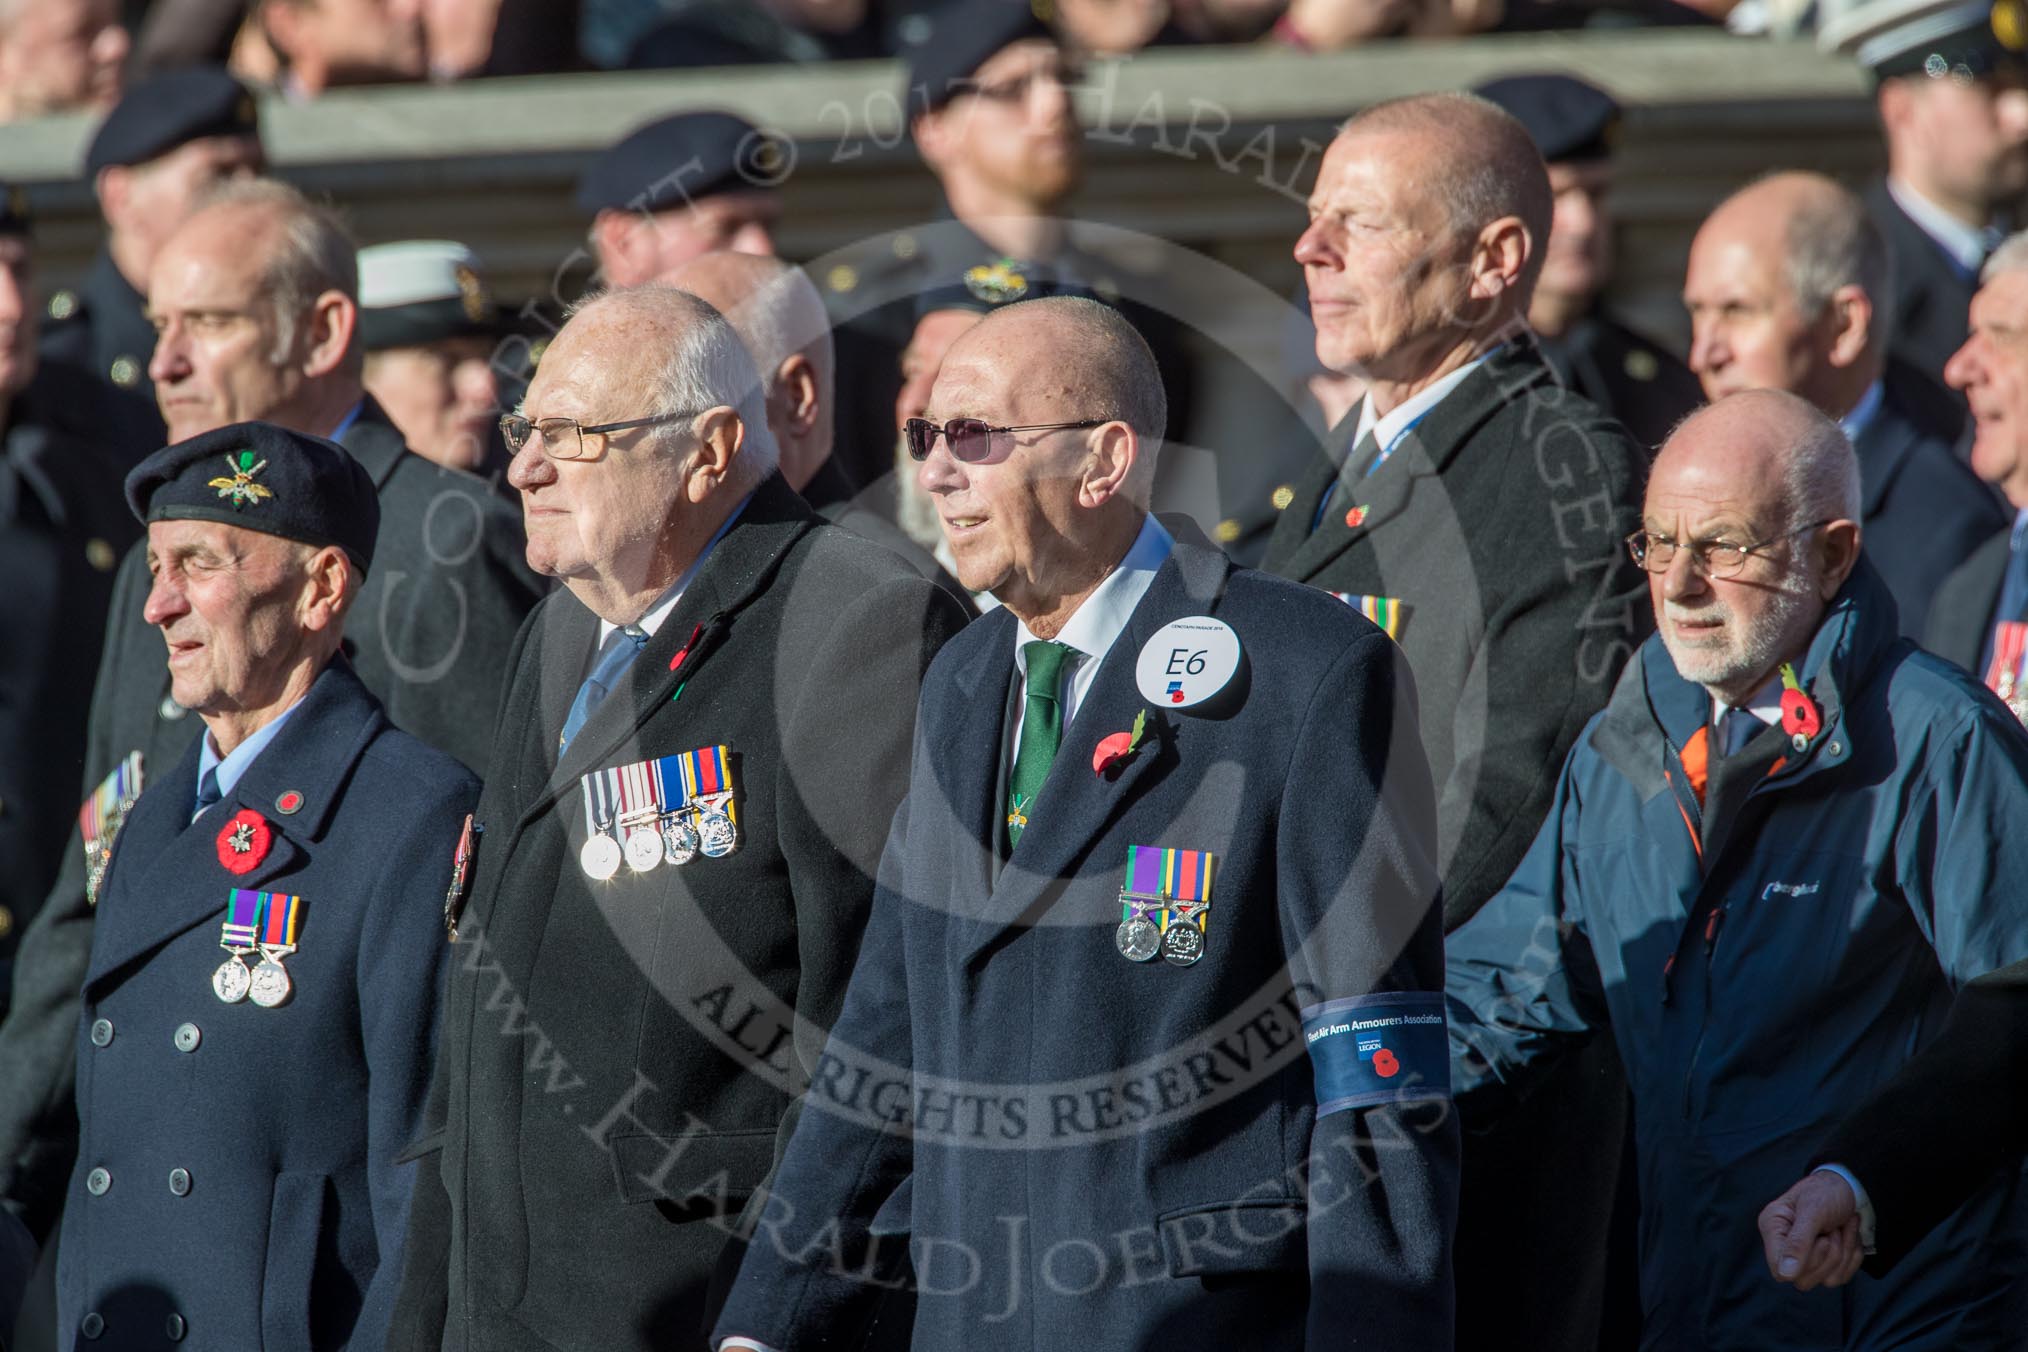 Fleet Air Arm Armourers Association  (Group E6, 27 members) during the Royal British Legion March Past on Remembrance Sunday at the Cenotaph, Whitehall, Westminster, London, 11 November 2018, 11:42.